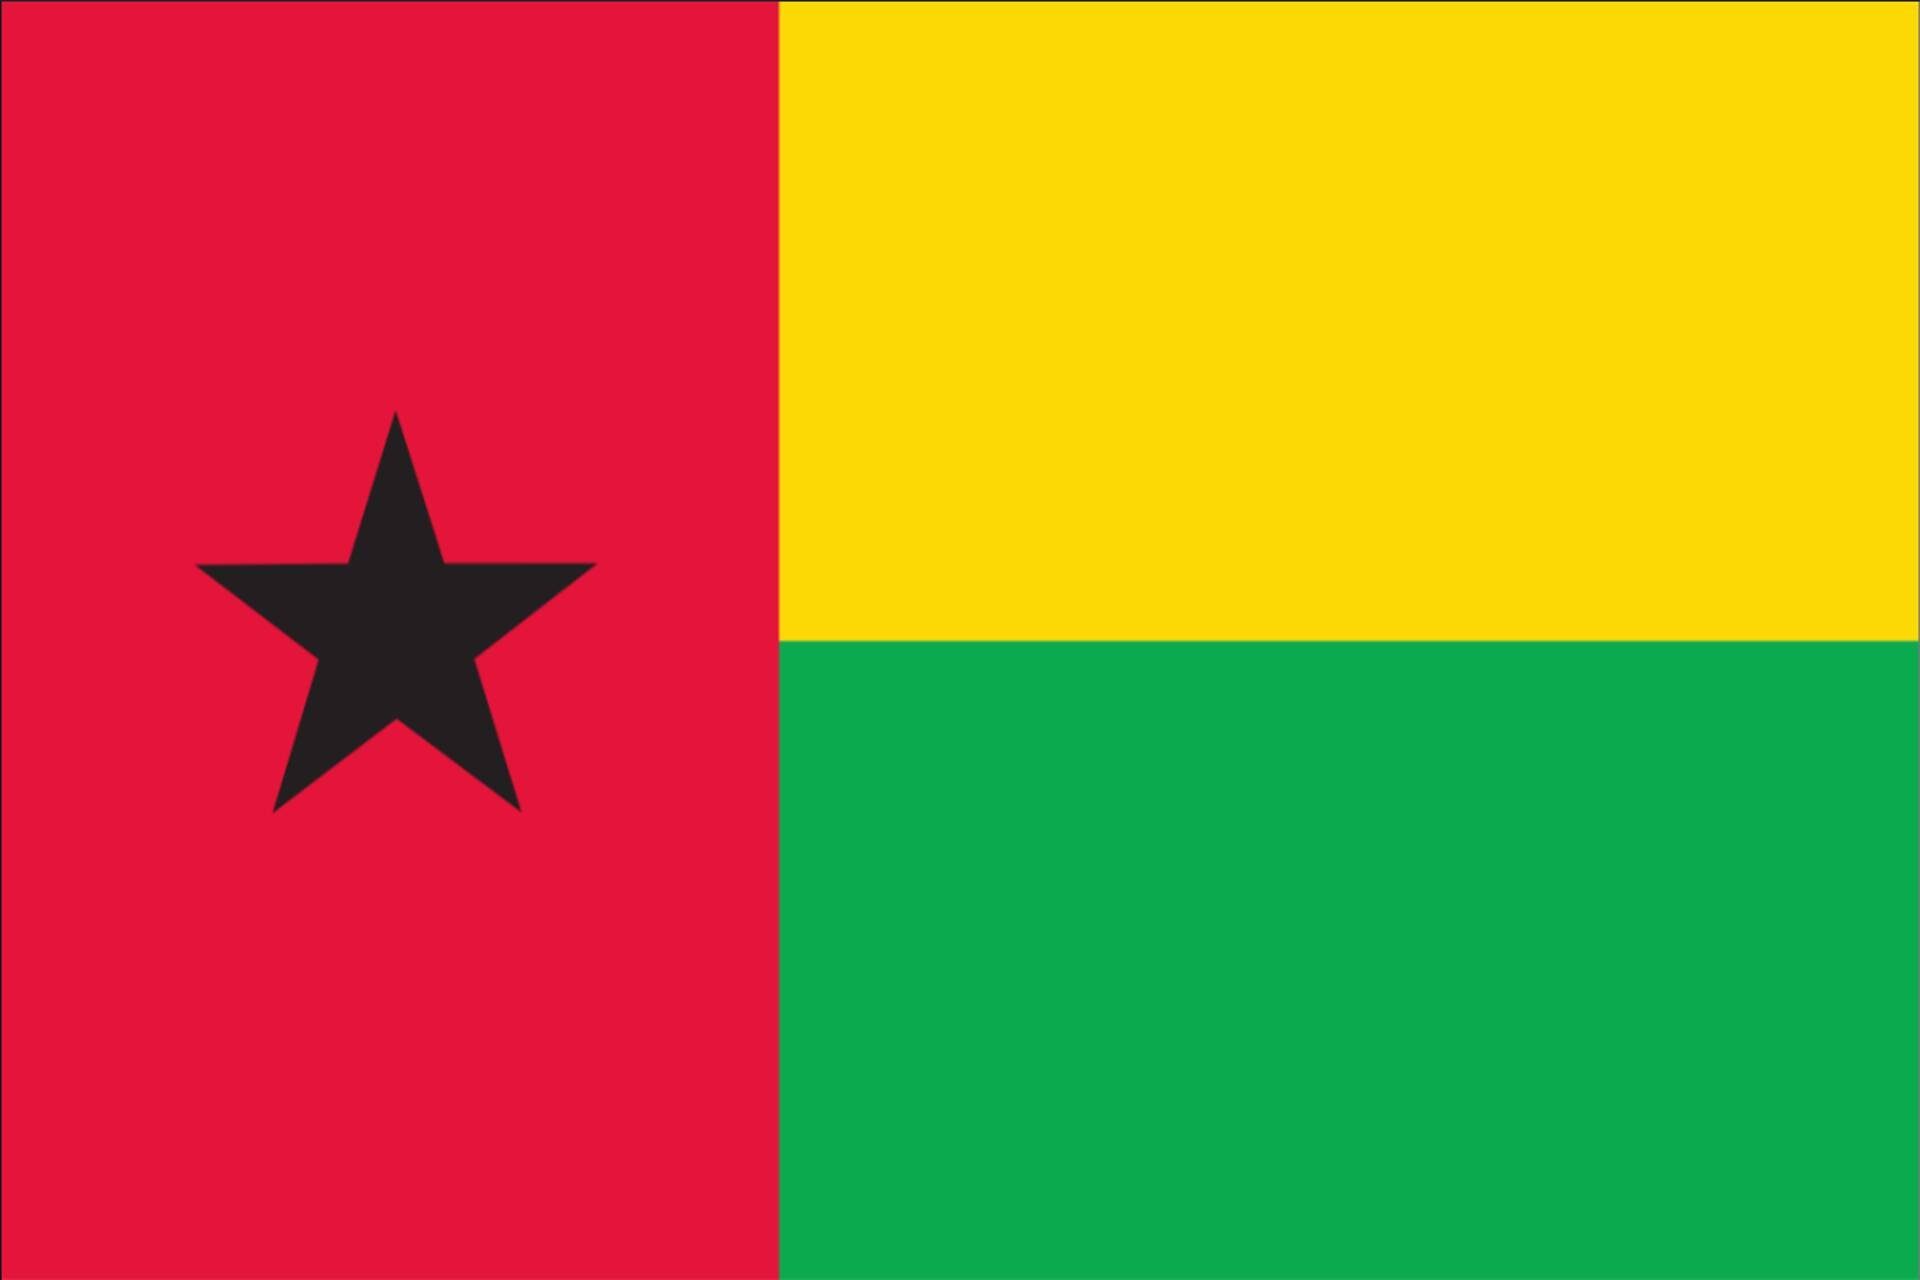 flaggenmeer Flagge Guinea-Bissau 80 g/m²